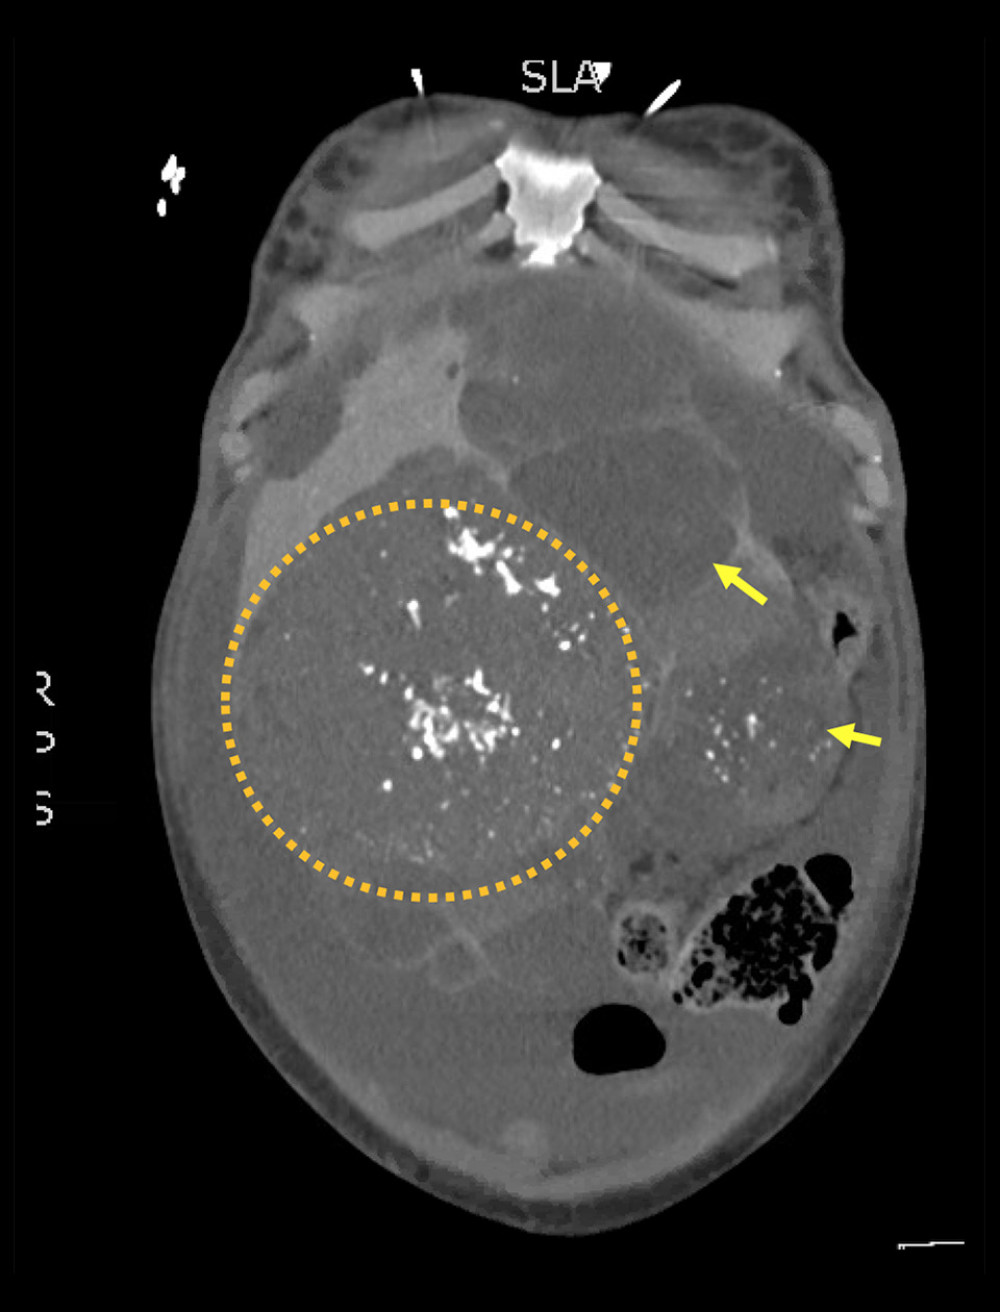 Coronal view of a computed tomography scan showing multiple hepatic hemangiomas (arrows). Largest one measure 14.3×14.6×14.9 cm (circle).